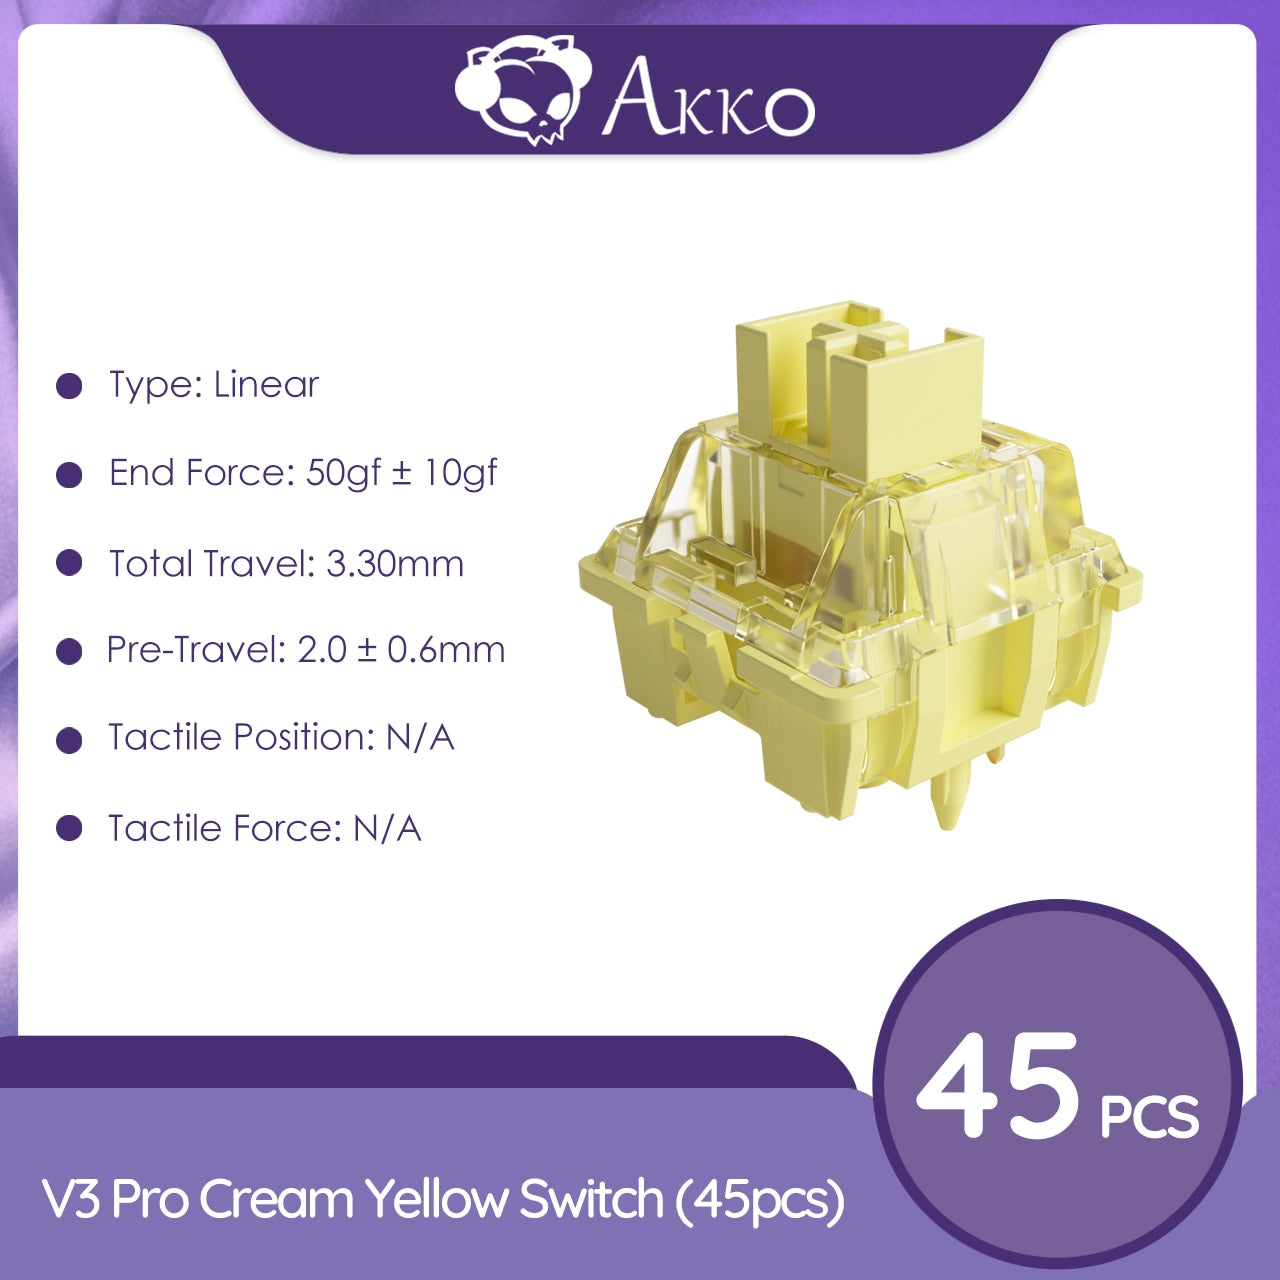 Akko V3 Cream Yellow Pro Switch 5 Pin 50gf Linear Switch with Dustproof Stem Compatible with MX Mechanical Keyboard